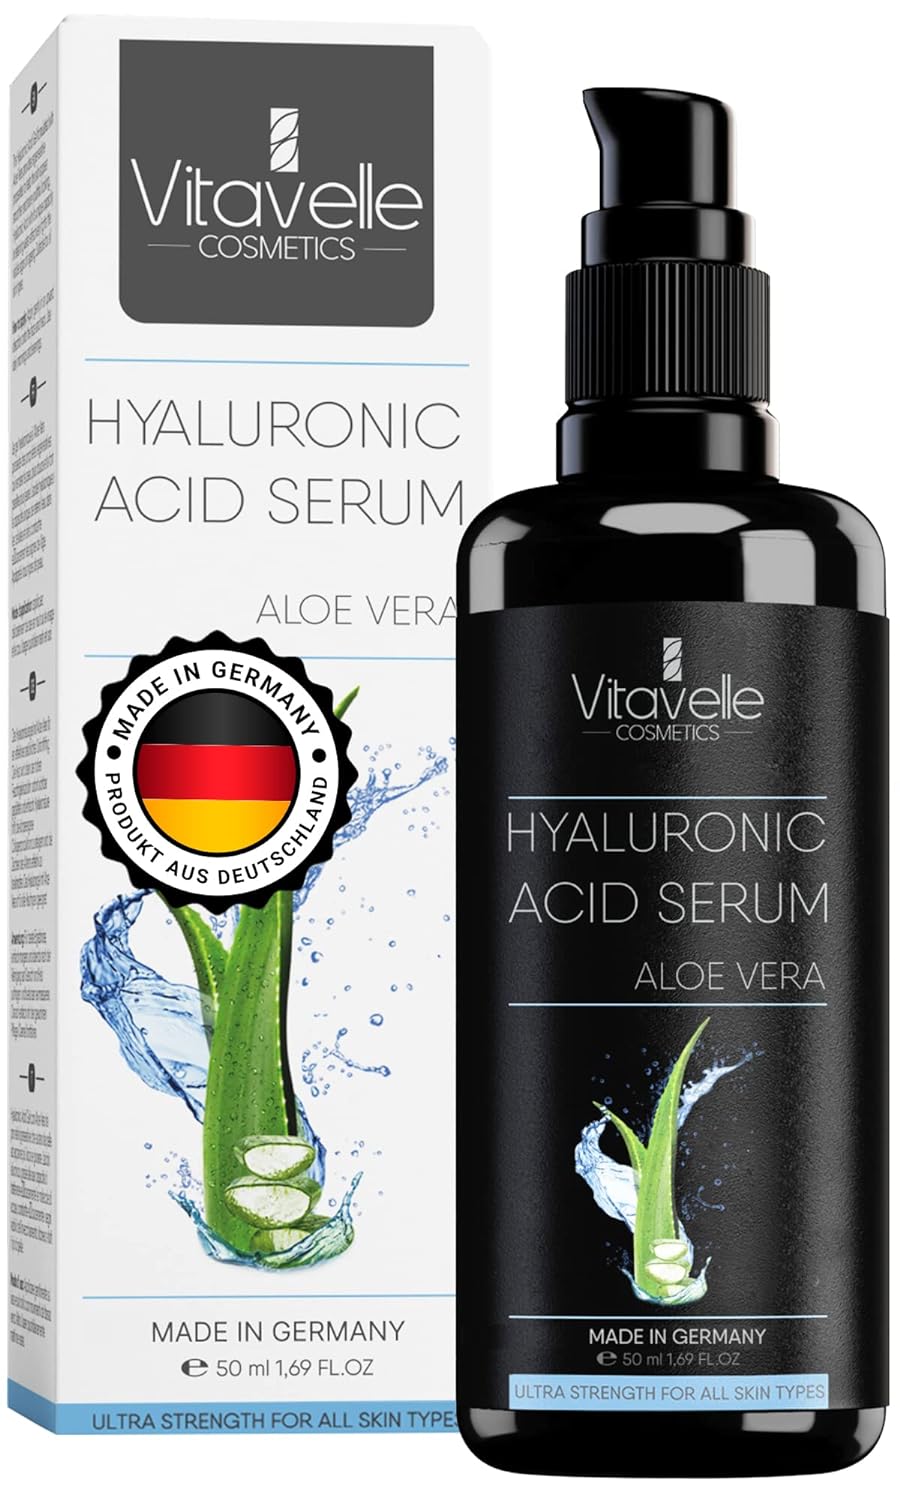 Vitavelle Hydrating Hyaluronic Acid Serum for Face - Aloe Vera Hydrating Serum for Face & Anti Aging Moisturizer for a Smooth, Soft, Even Look - Hydrating Serum & Skin Care Moisturizer